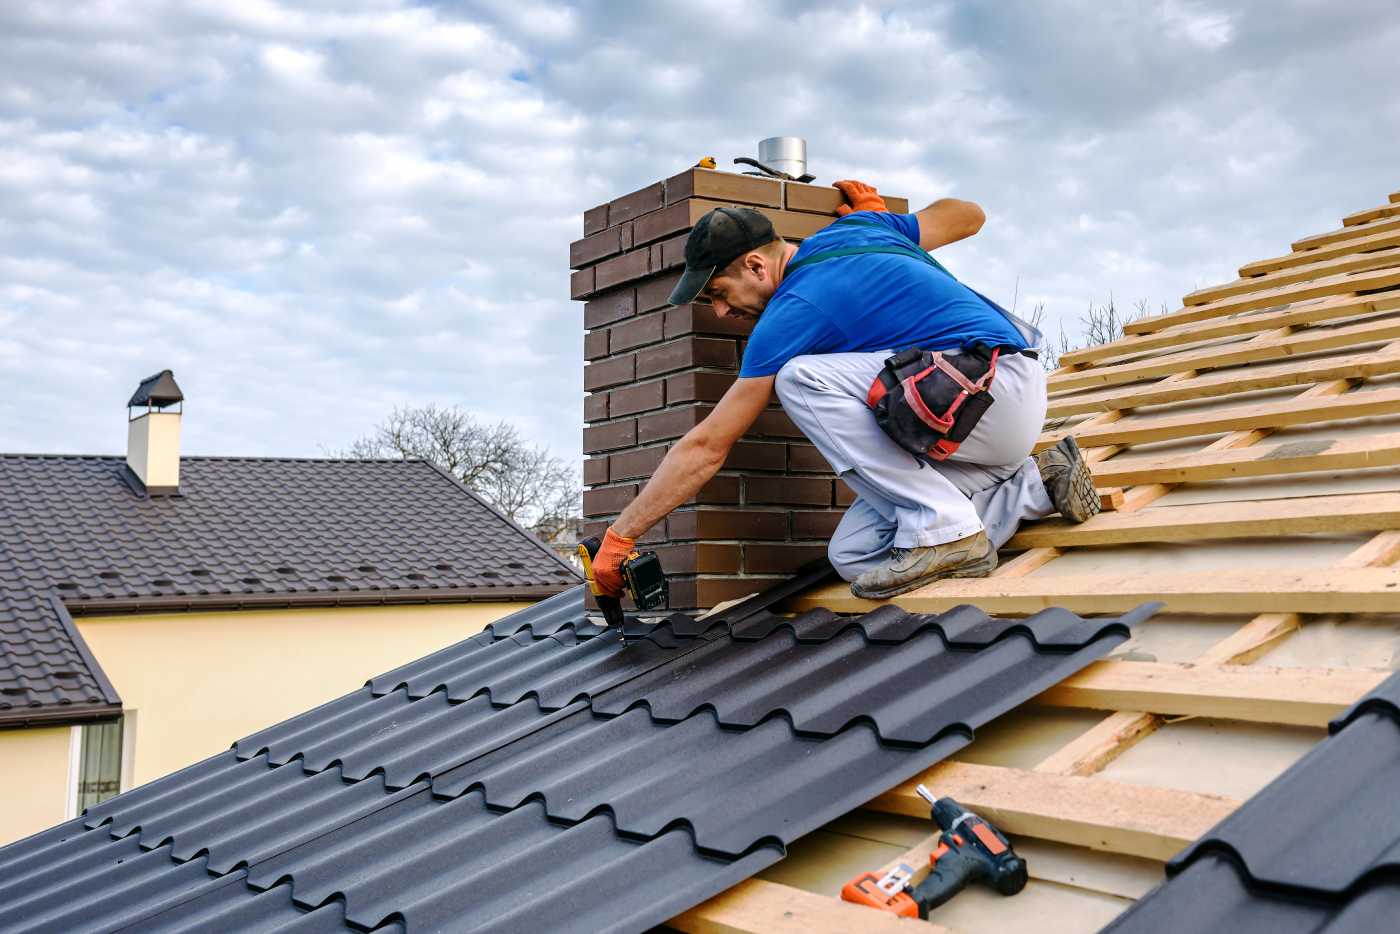 Roofing contractor at work securing metal roof tiles